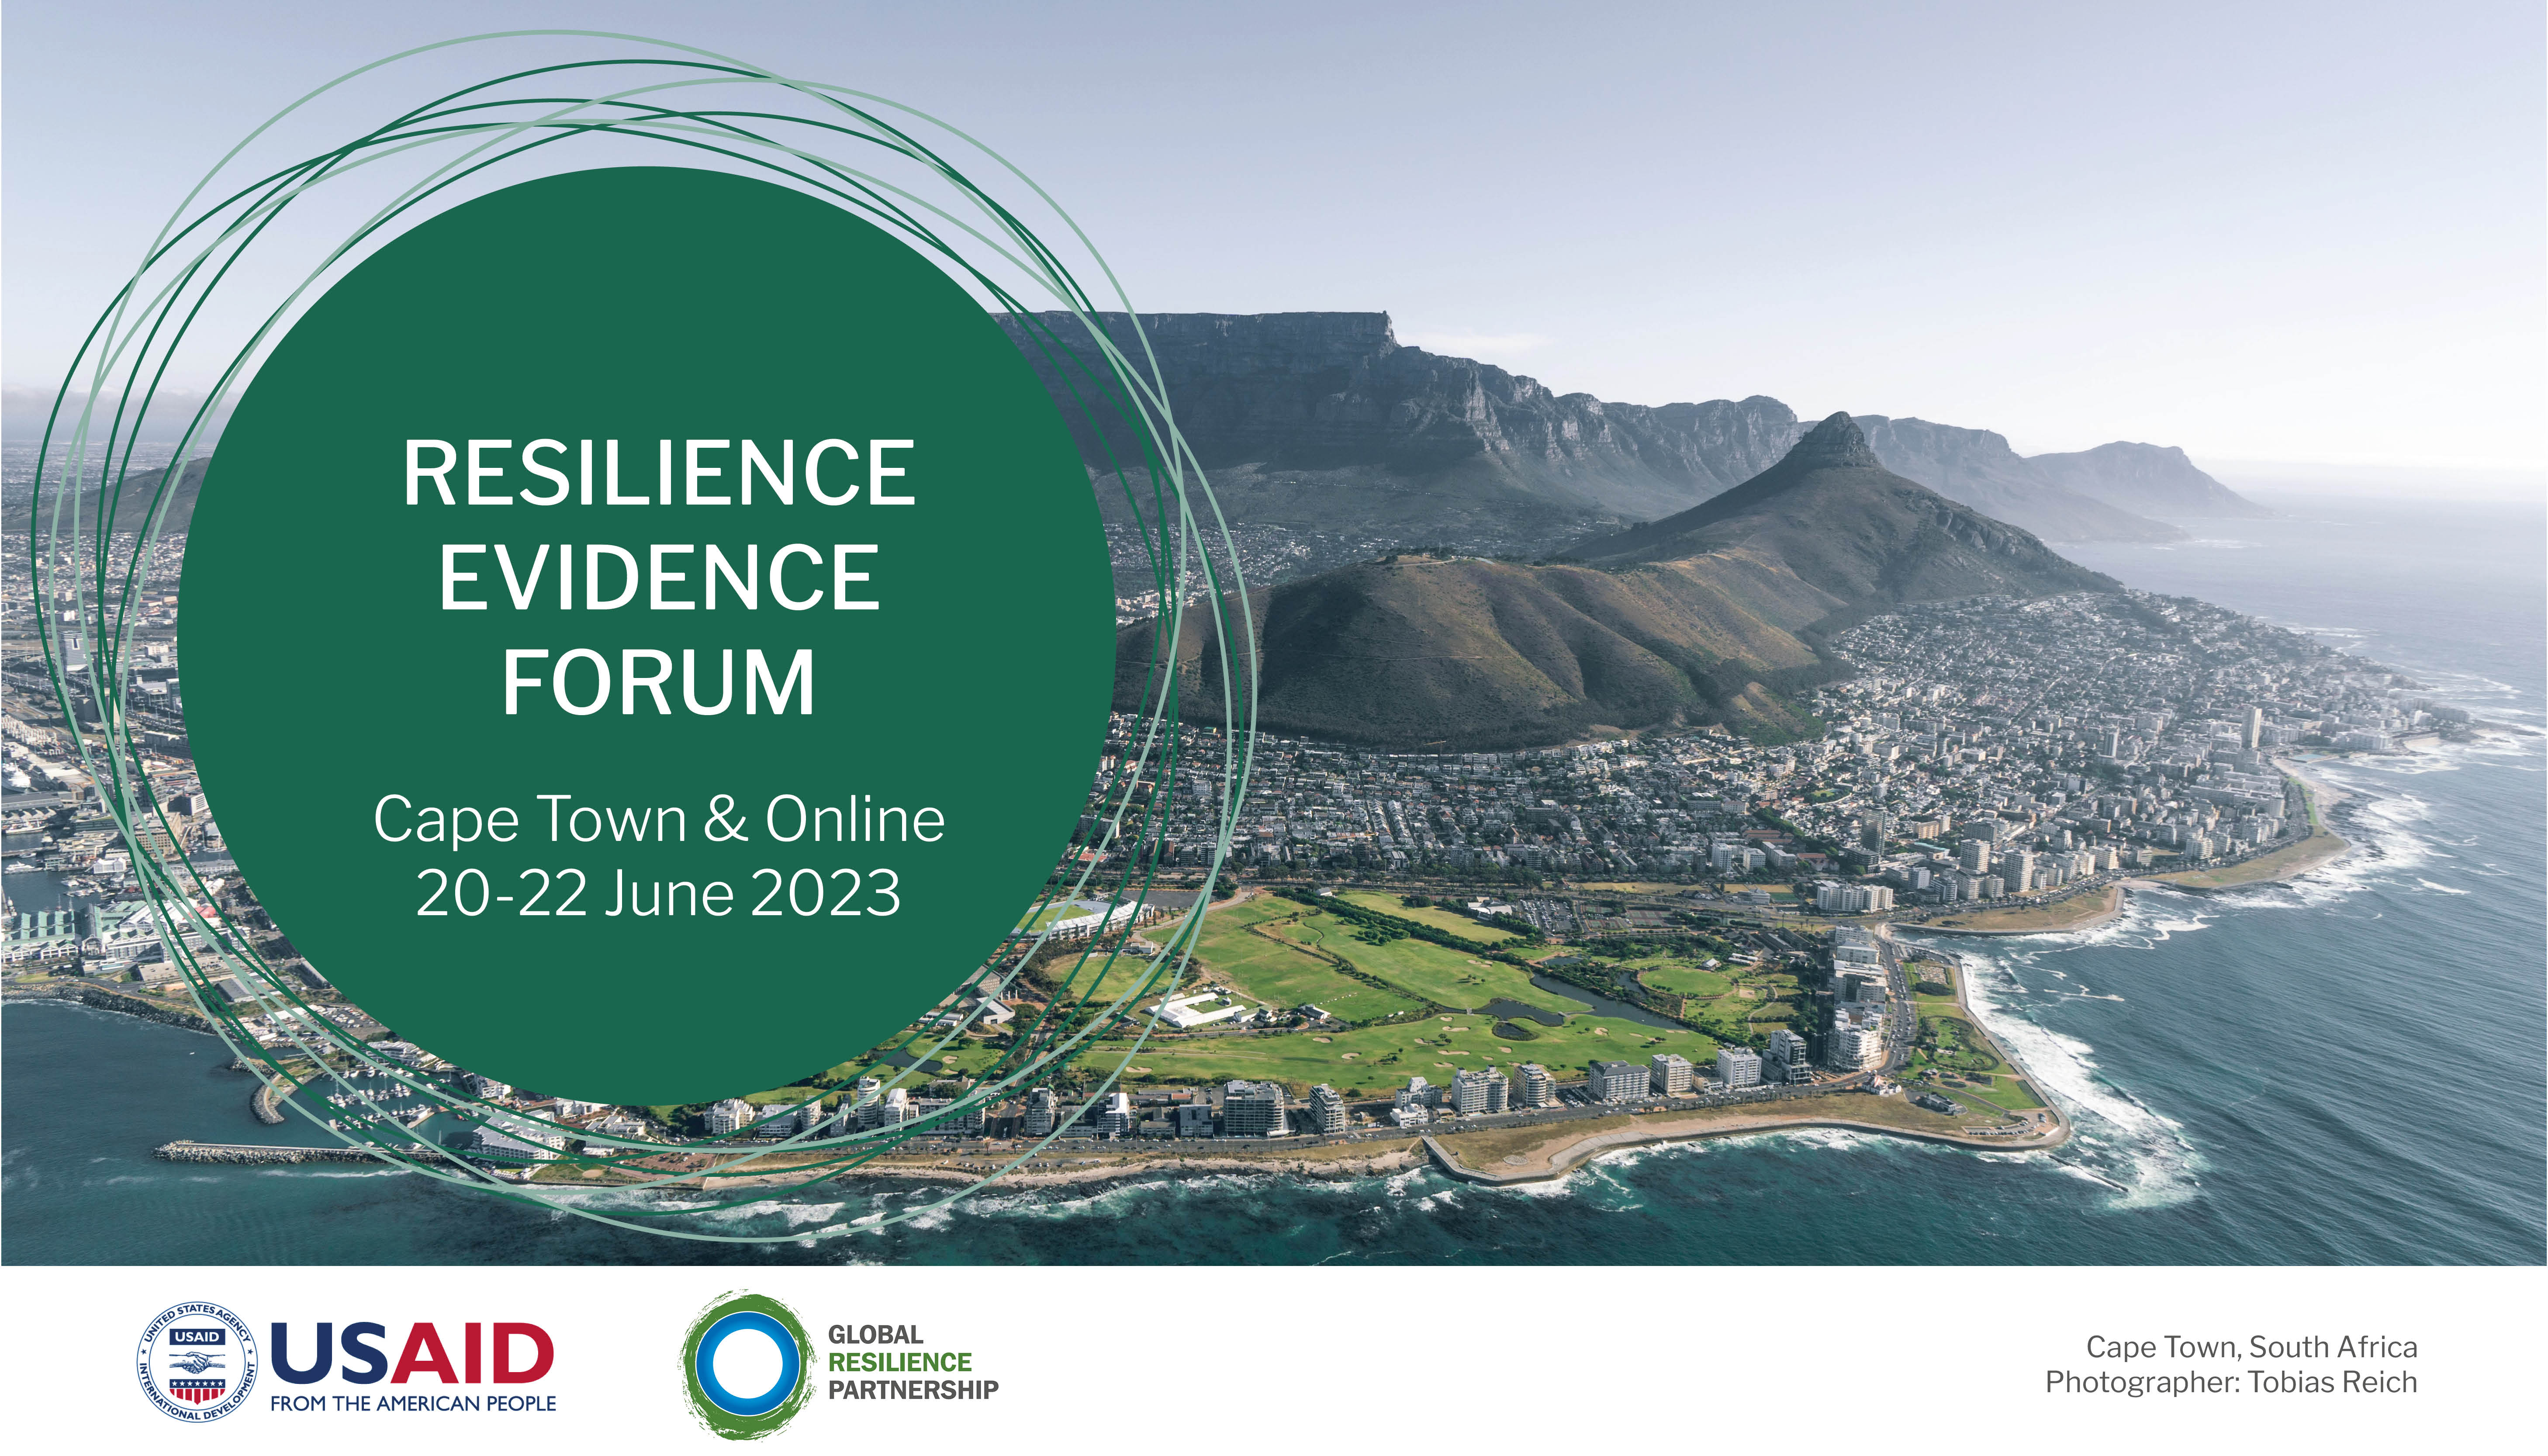 view of Cape Town South Africa with the title of event and dates of conference